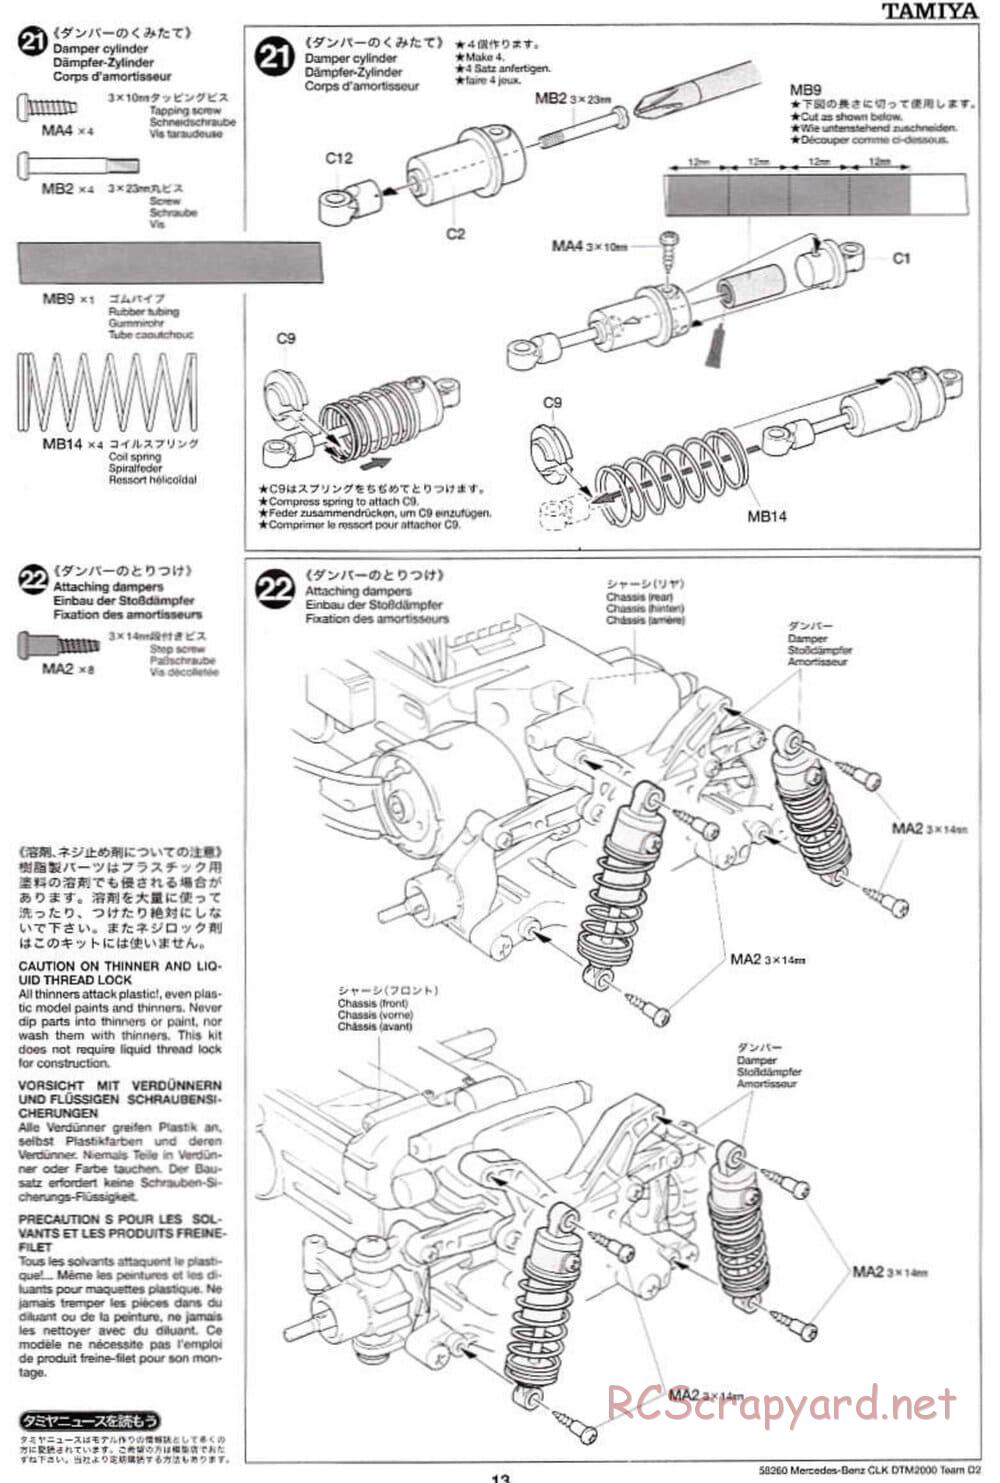 Tamiya - Mercedes Benz CLK DTM 2000 Team D2 - TL-01 Chassis - Manual - Page 13